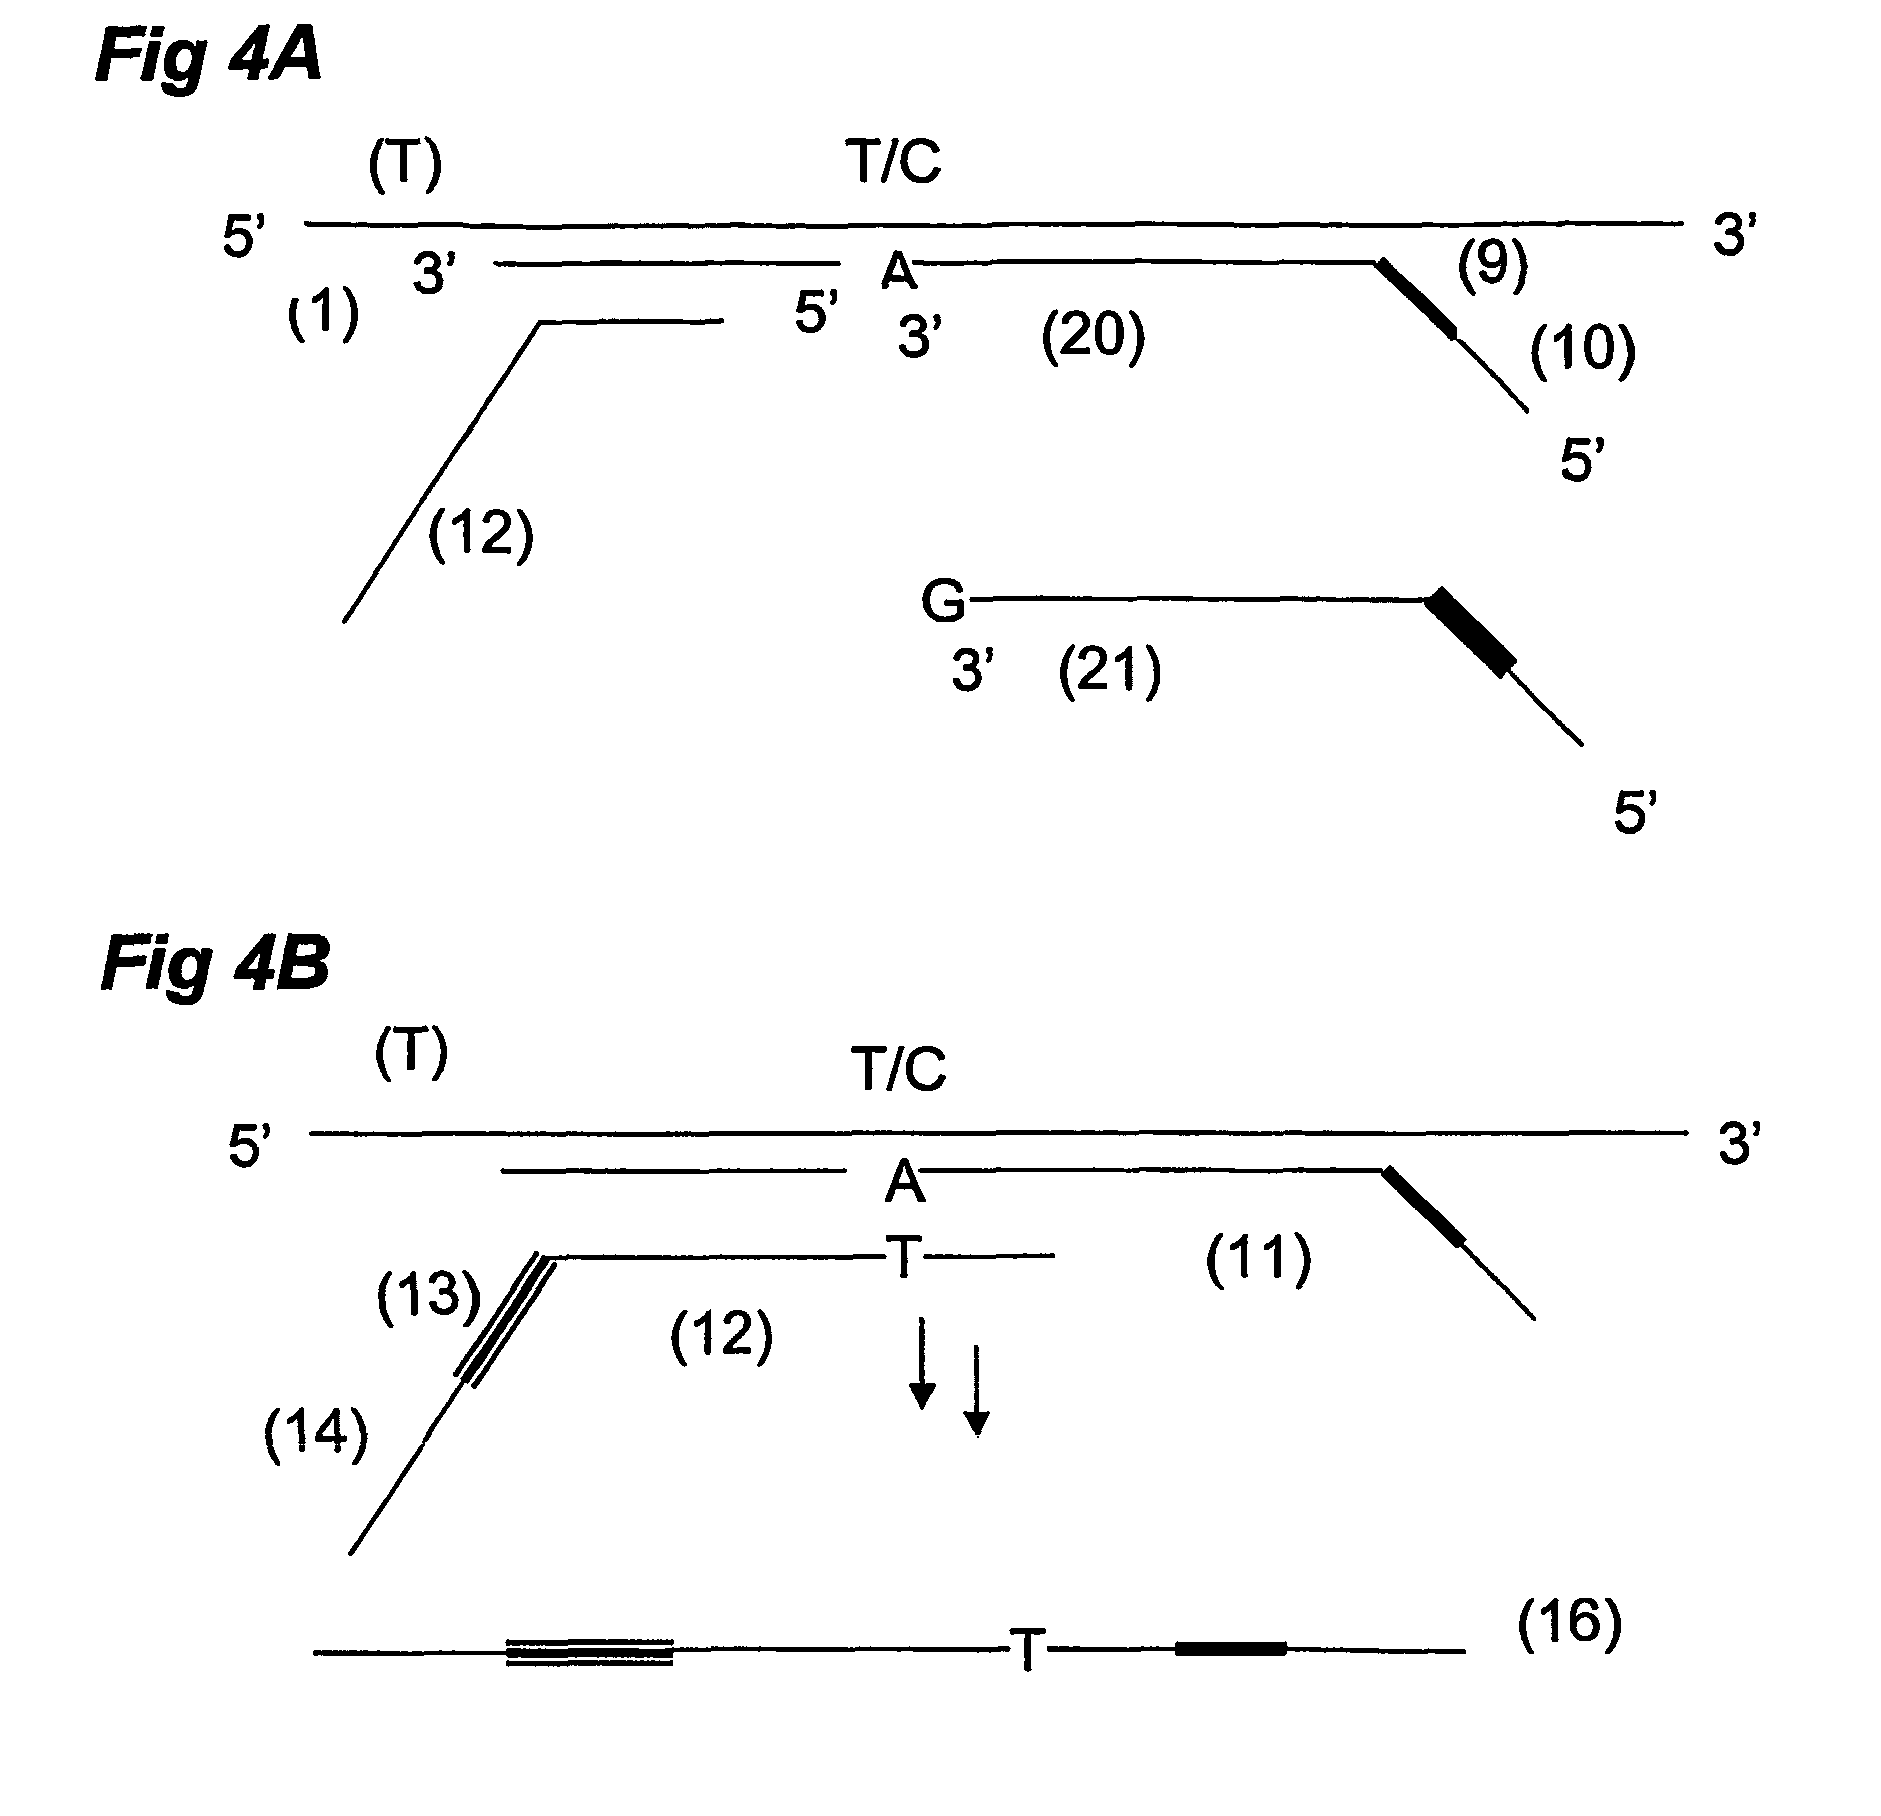 Ola-based methods for the detection of target nucleic avid sequences